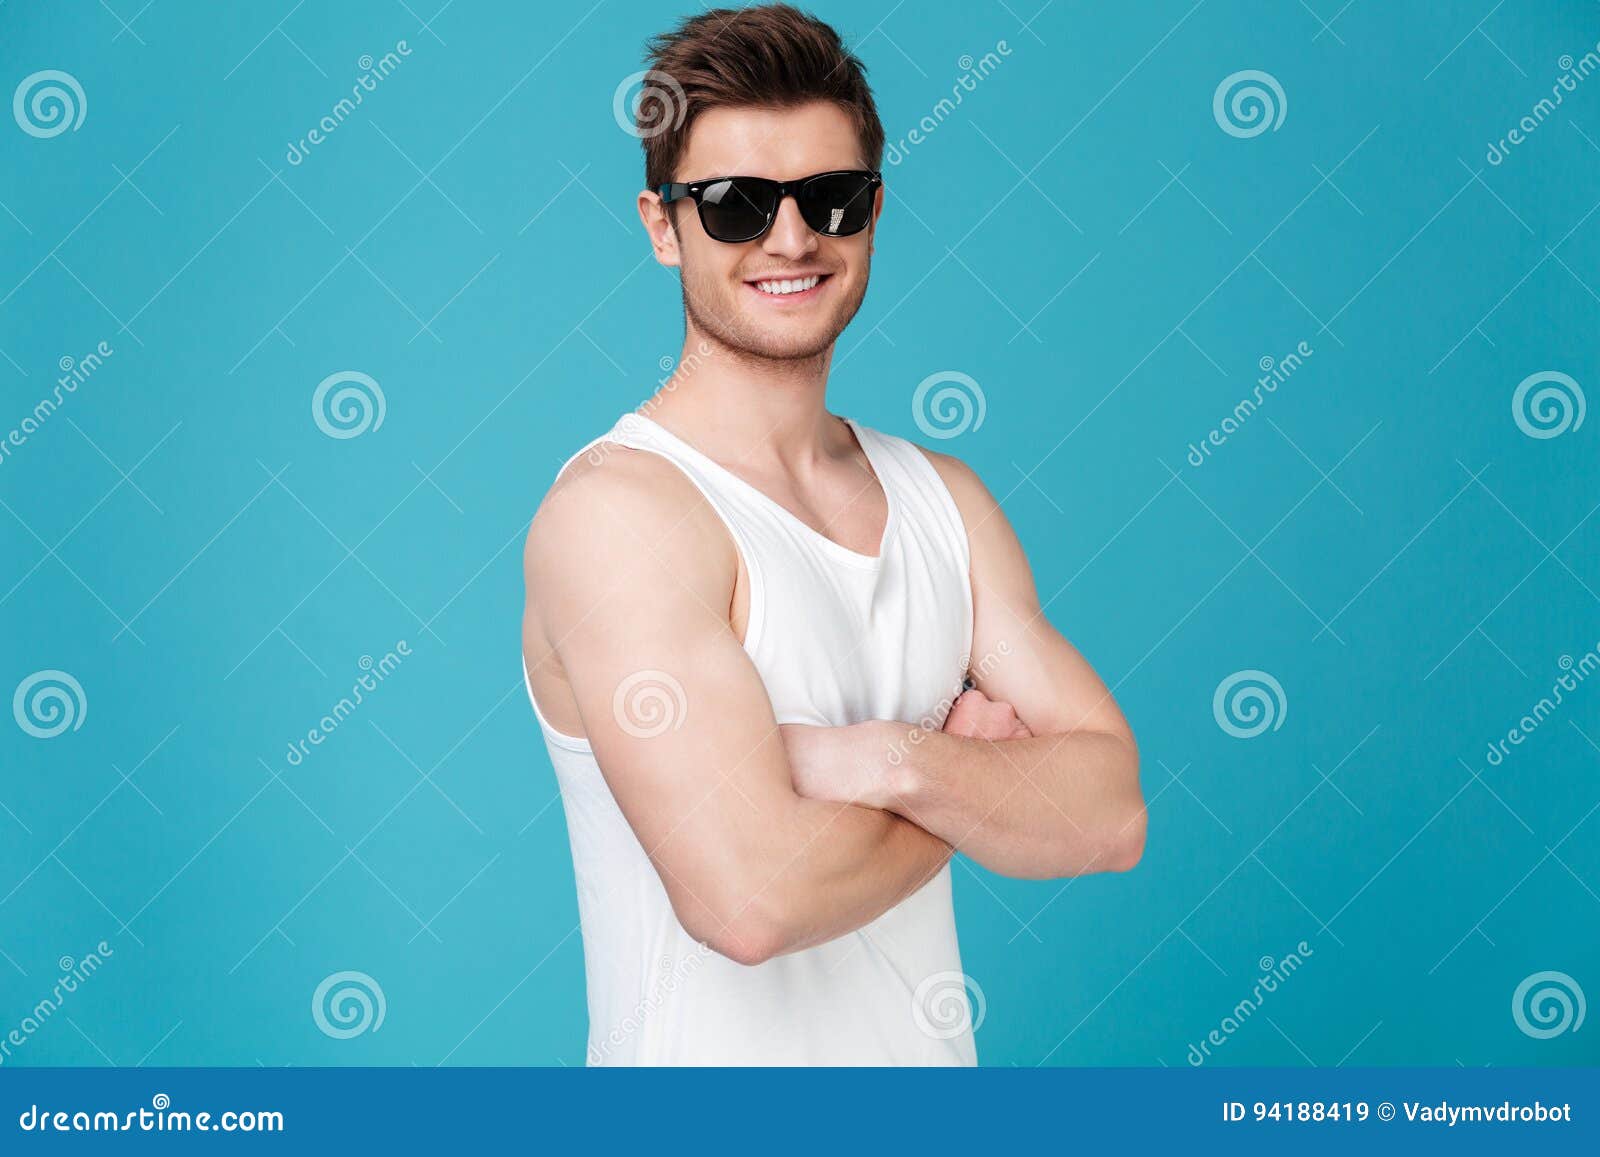 Young Man Wearing Sunglasses Looking Camera Stock Image - Image of ...